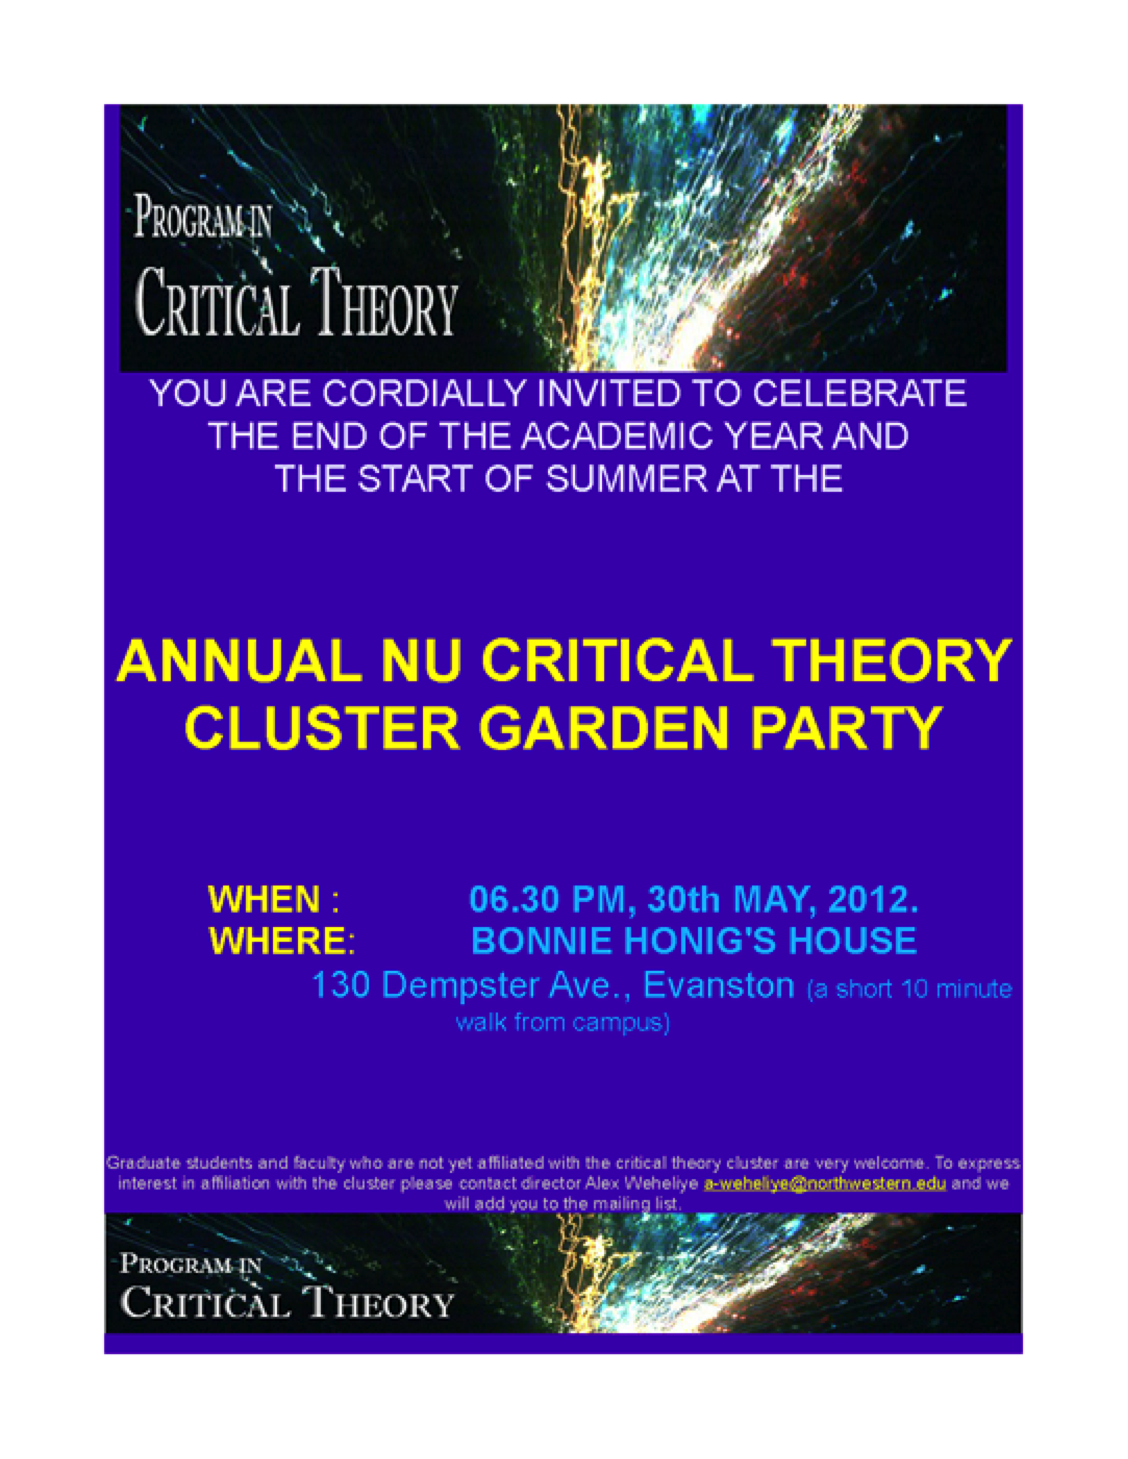 Critical Theory Cluster Garden Party